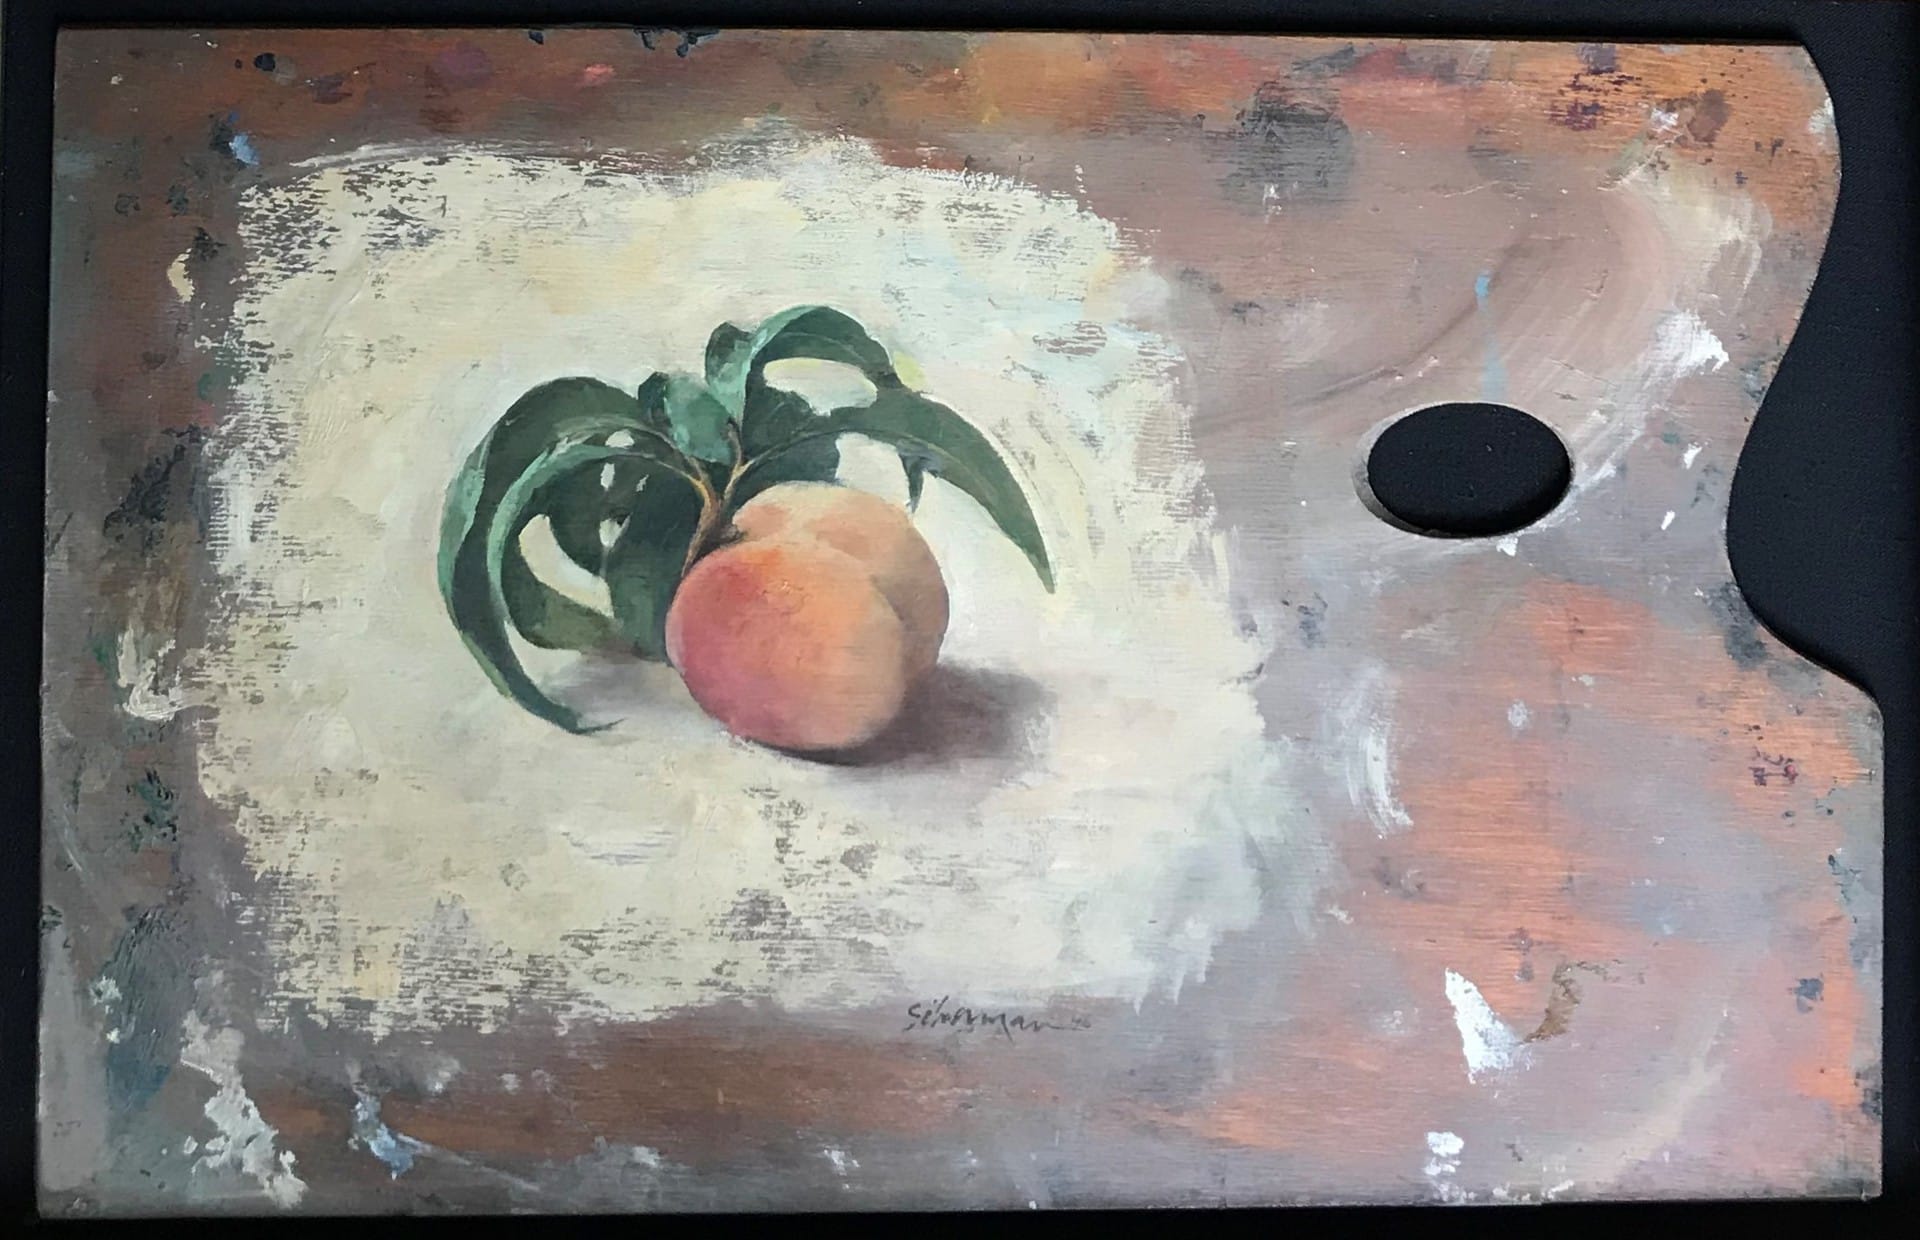 Silverman. Peach Palette. A still life of a single peach, with leaves, realistically painted on an artist's palate.